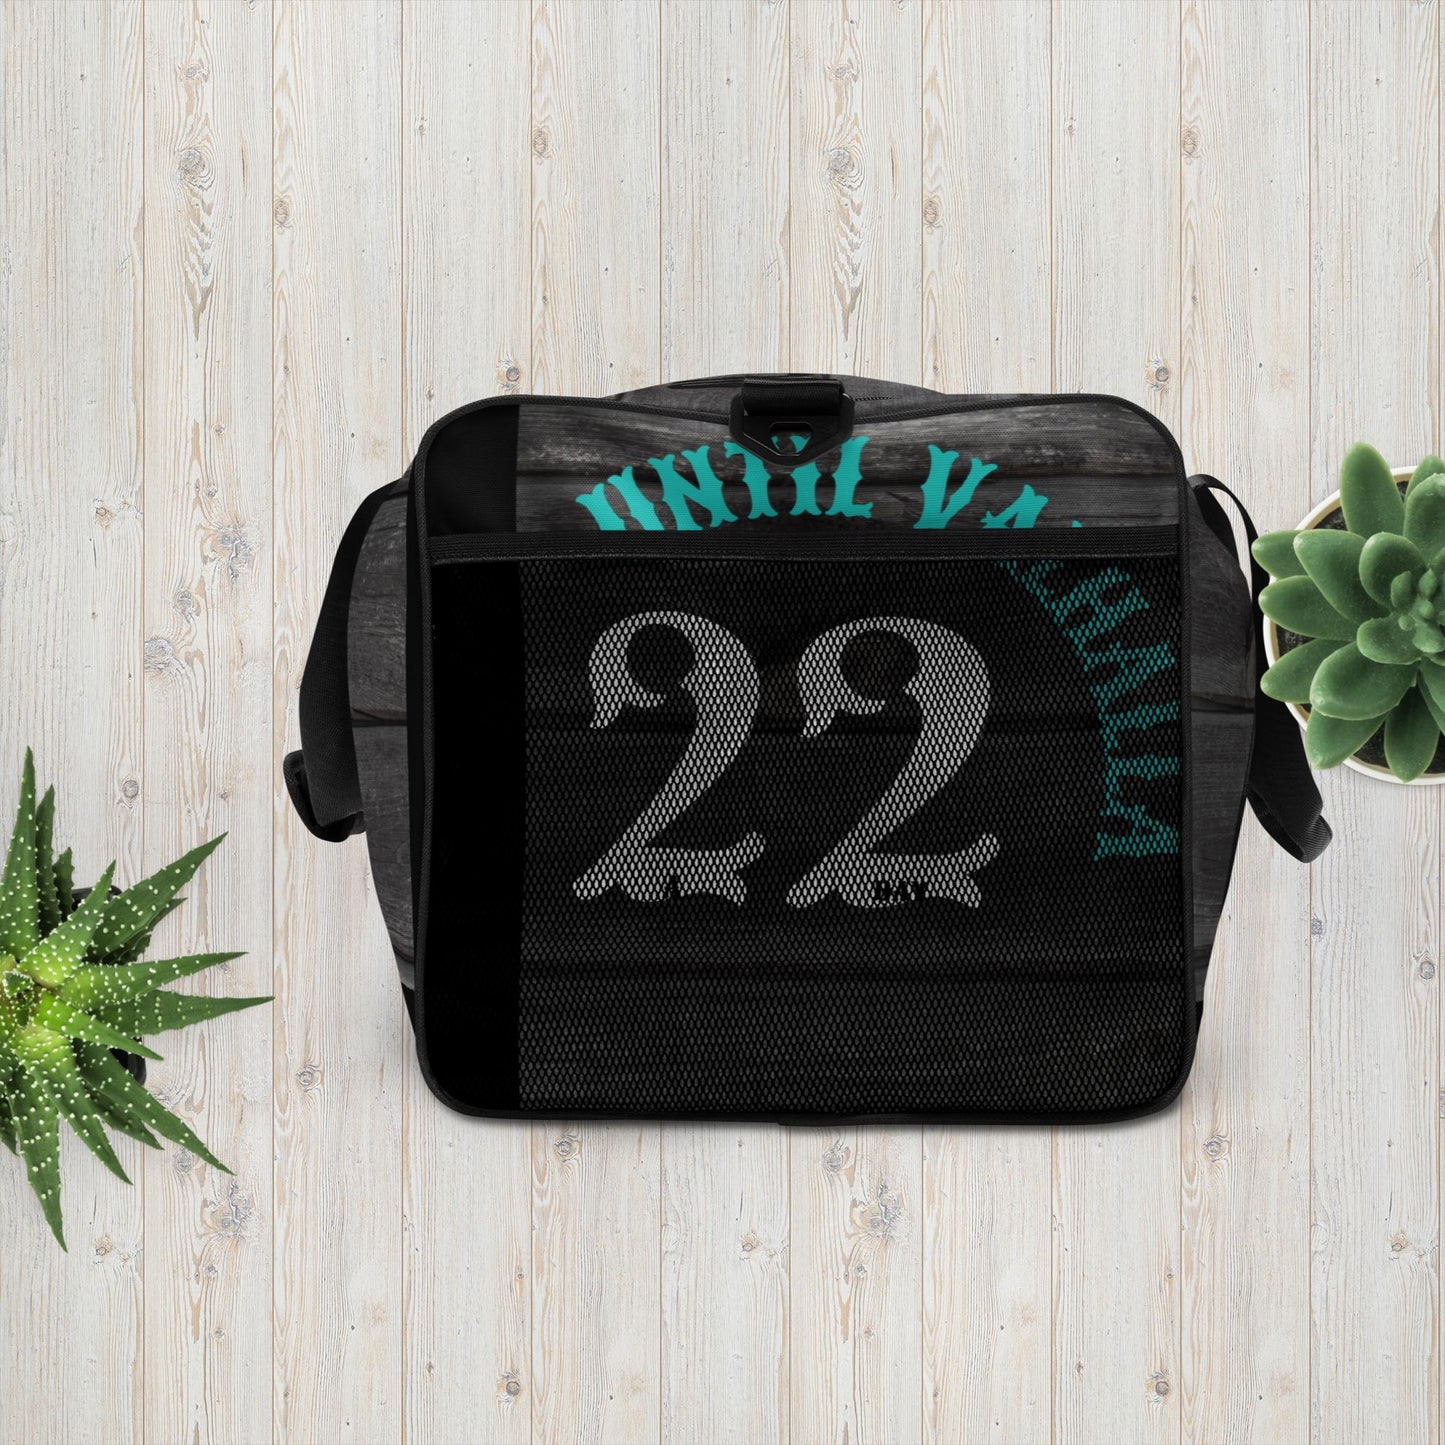 22 A DAY Duffle bag